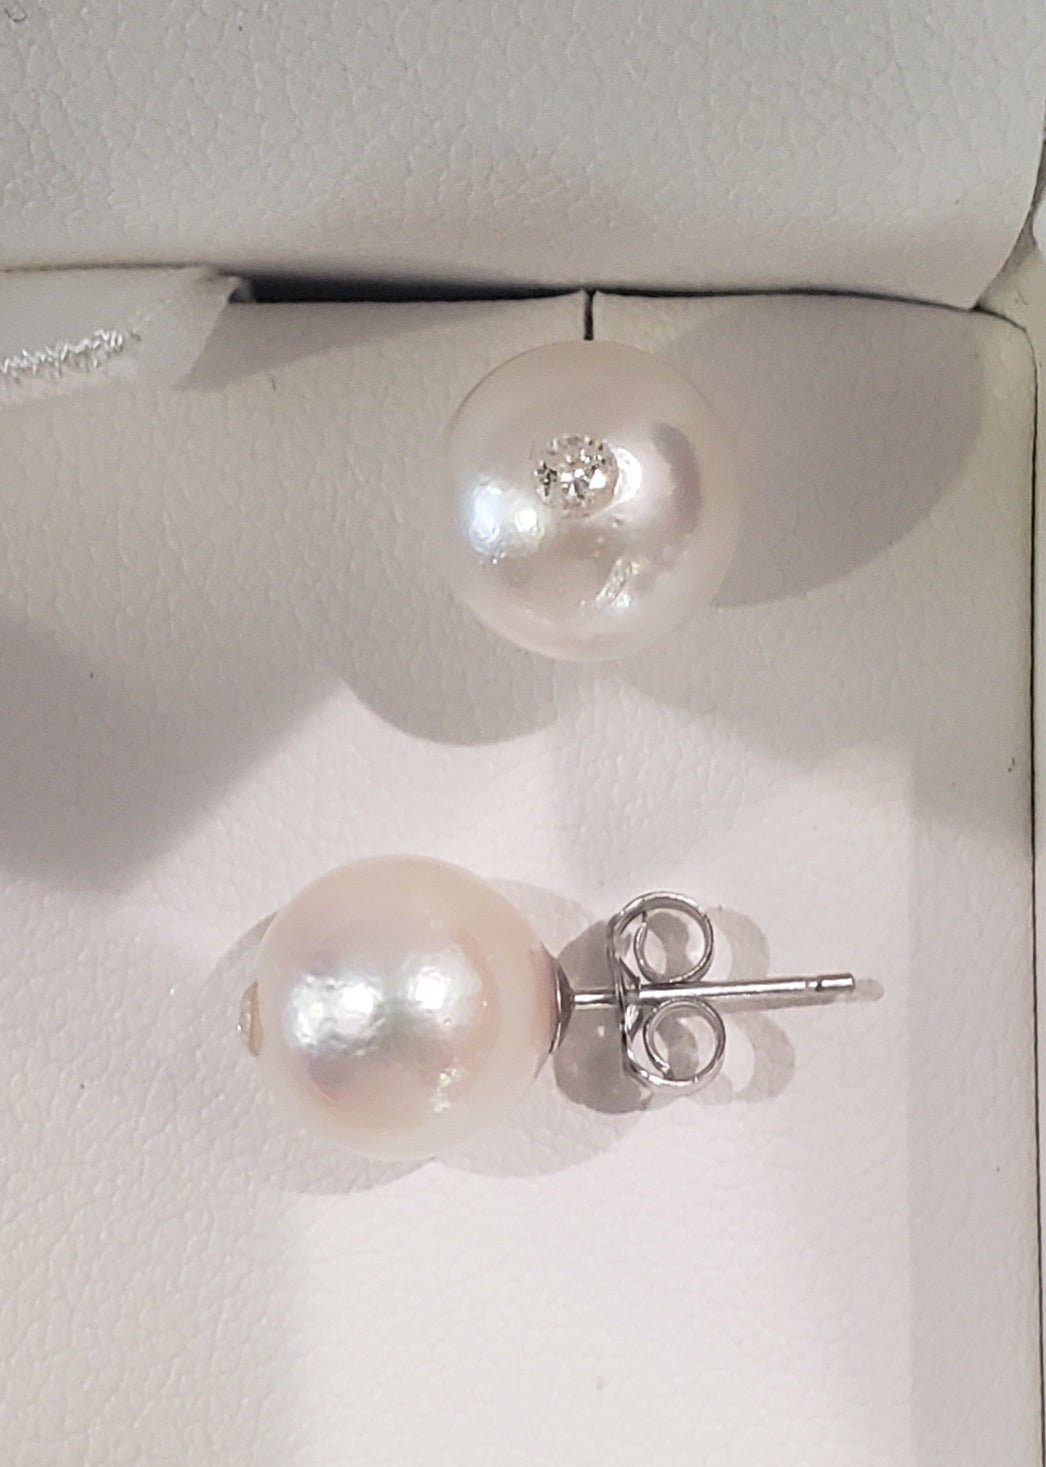 14K White Gold 7.5-8.0mm Cultured Pearl and 0.06cttw Diamond Earrings with Butterfly Backs